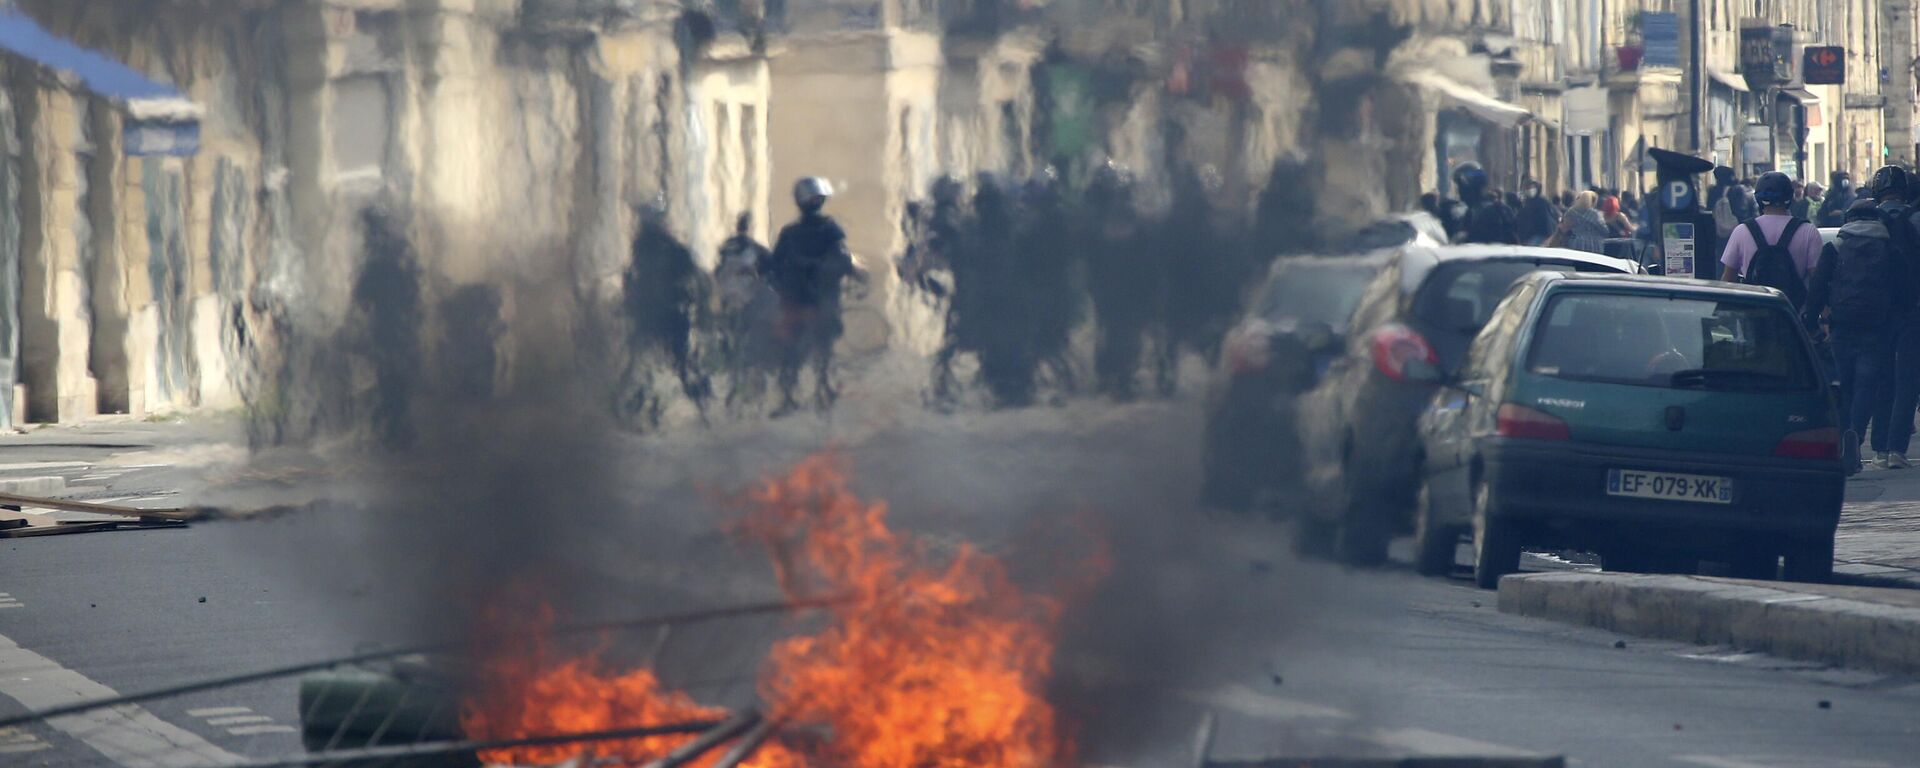 Riot police officers frame demonstrators nest a s street fire during a demonstration against French President Emmanuel Macron's push to move back France's legal retirement age from 62 to 64. - Sputnik International, 1920, 13.04.2023